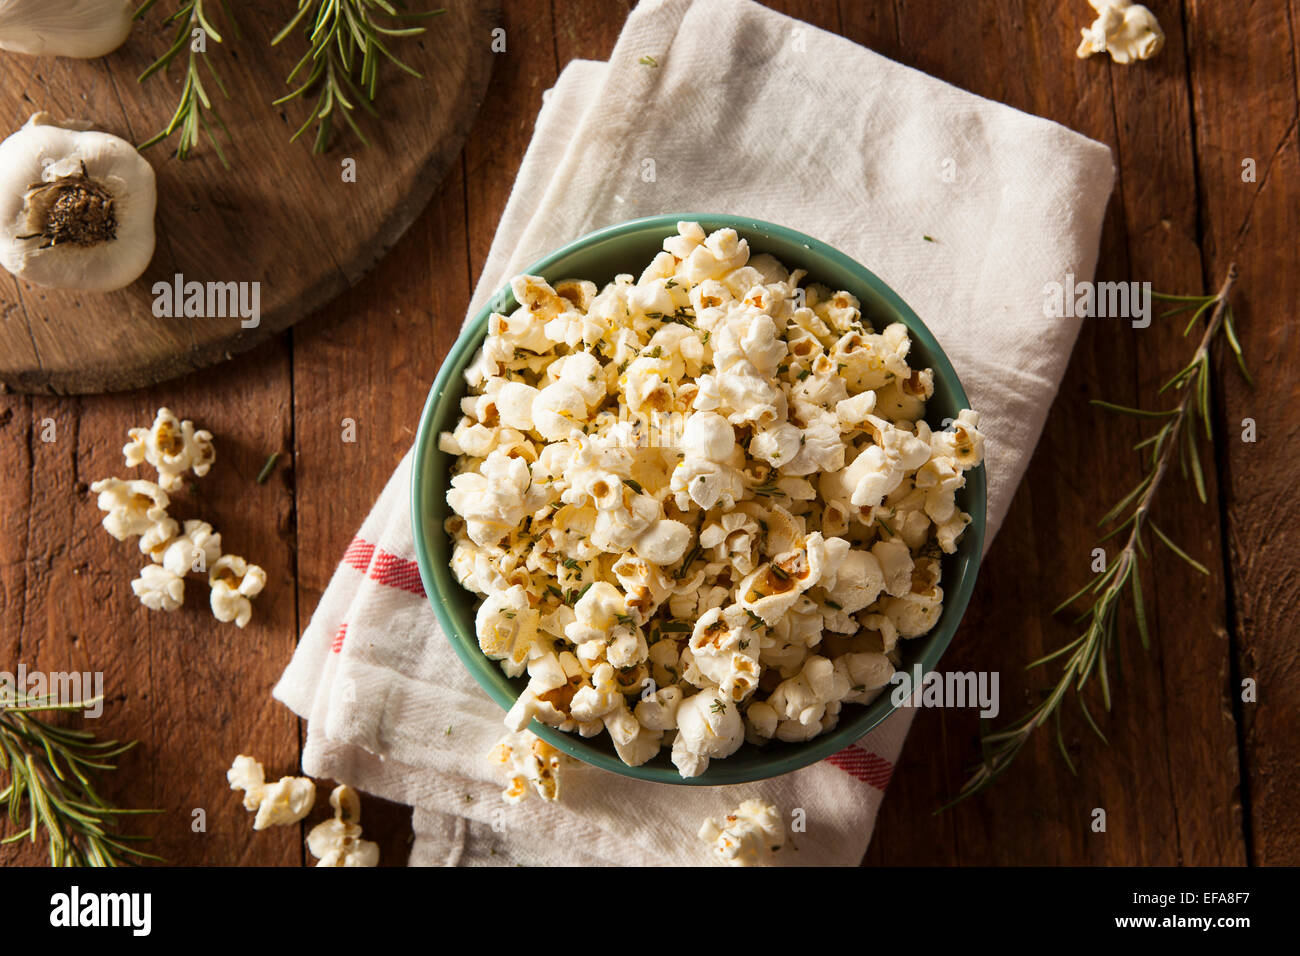 Homemade Rosemary Herb and Cheese Popcorn in a Bowl Stock Photo